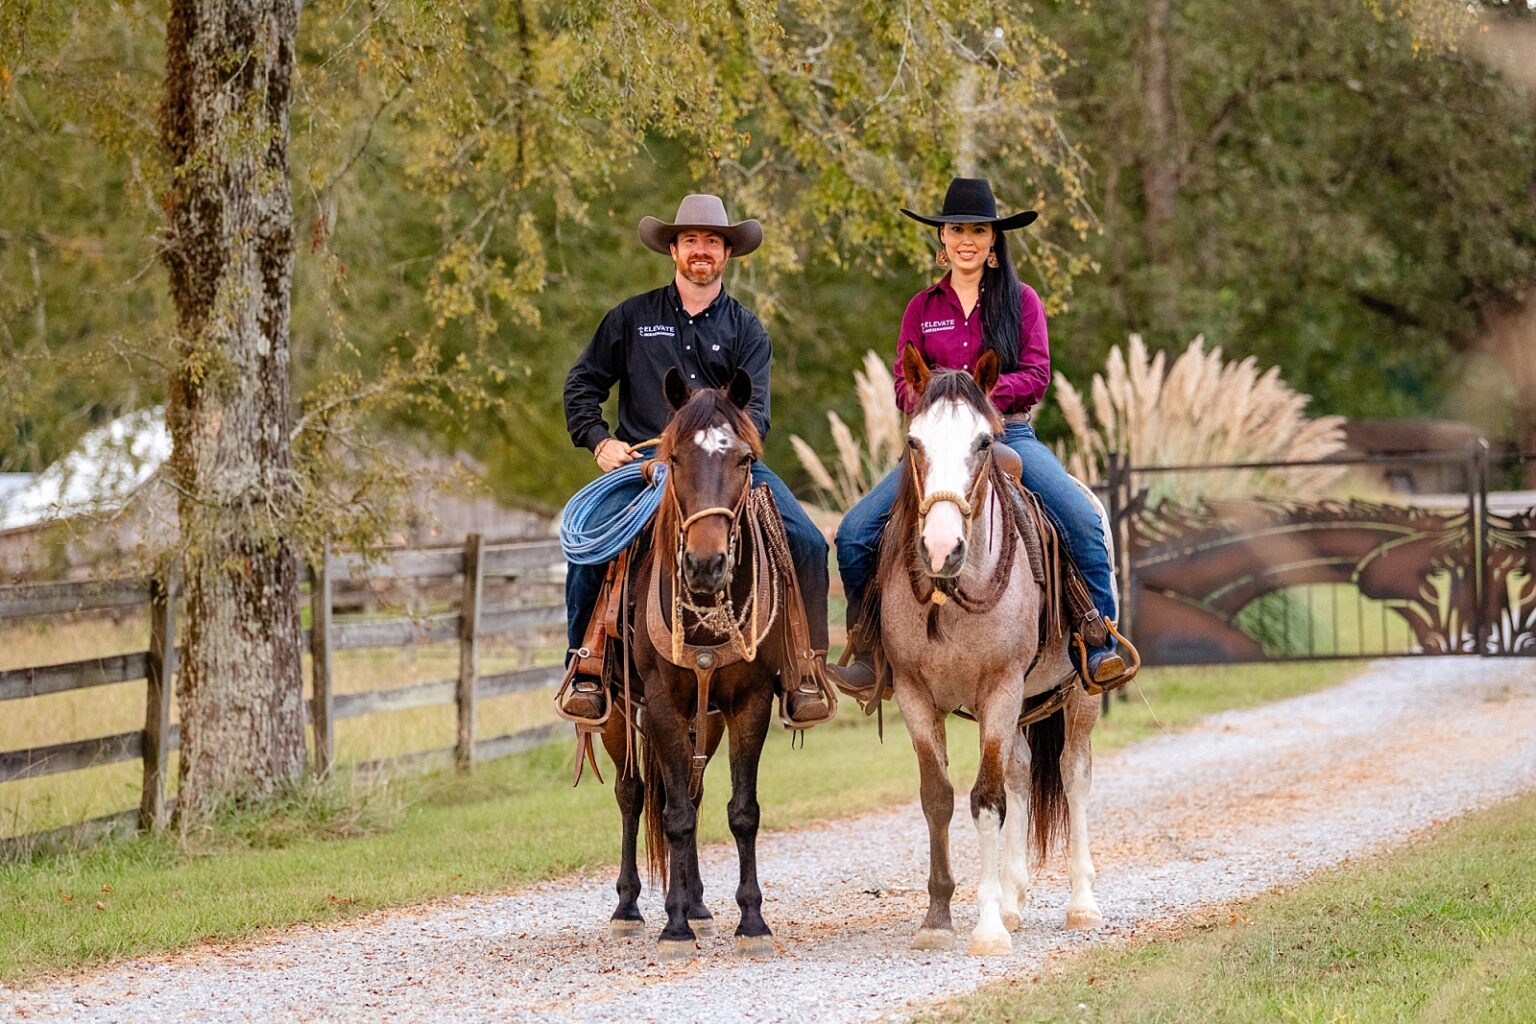 Elevate Horsemanship is a western horse trainer in Alabama who specializes in colt starting, problem solving, and cow horses. This equestrian business branding session created valuable content for their brand to use on social media, their website, and in printed materials at clinics and shows.